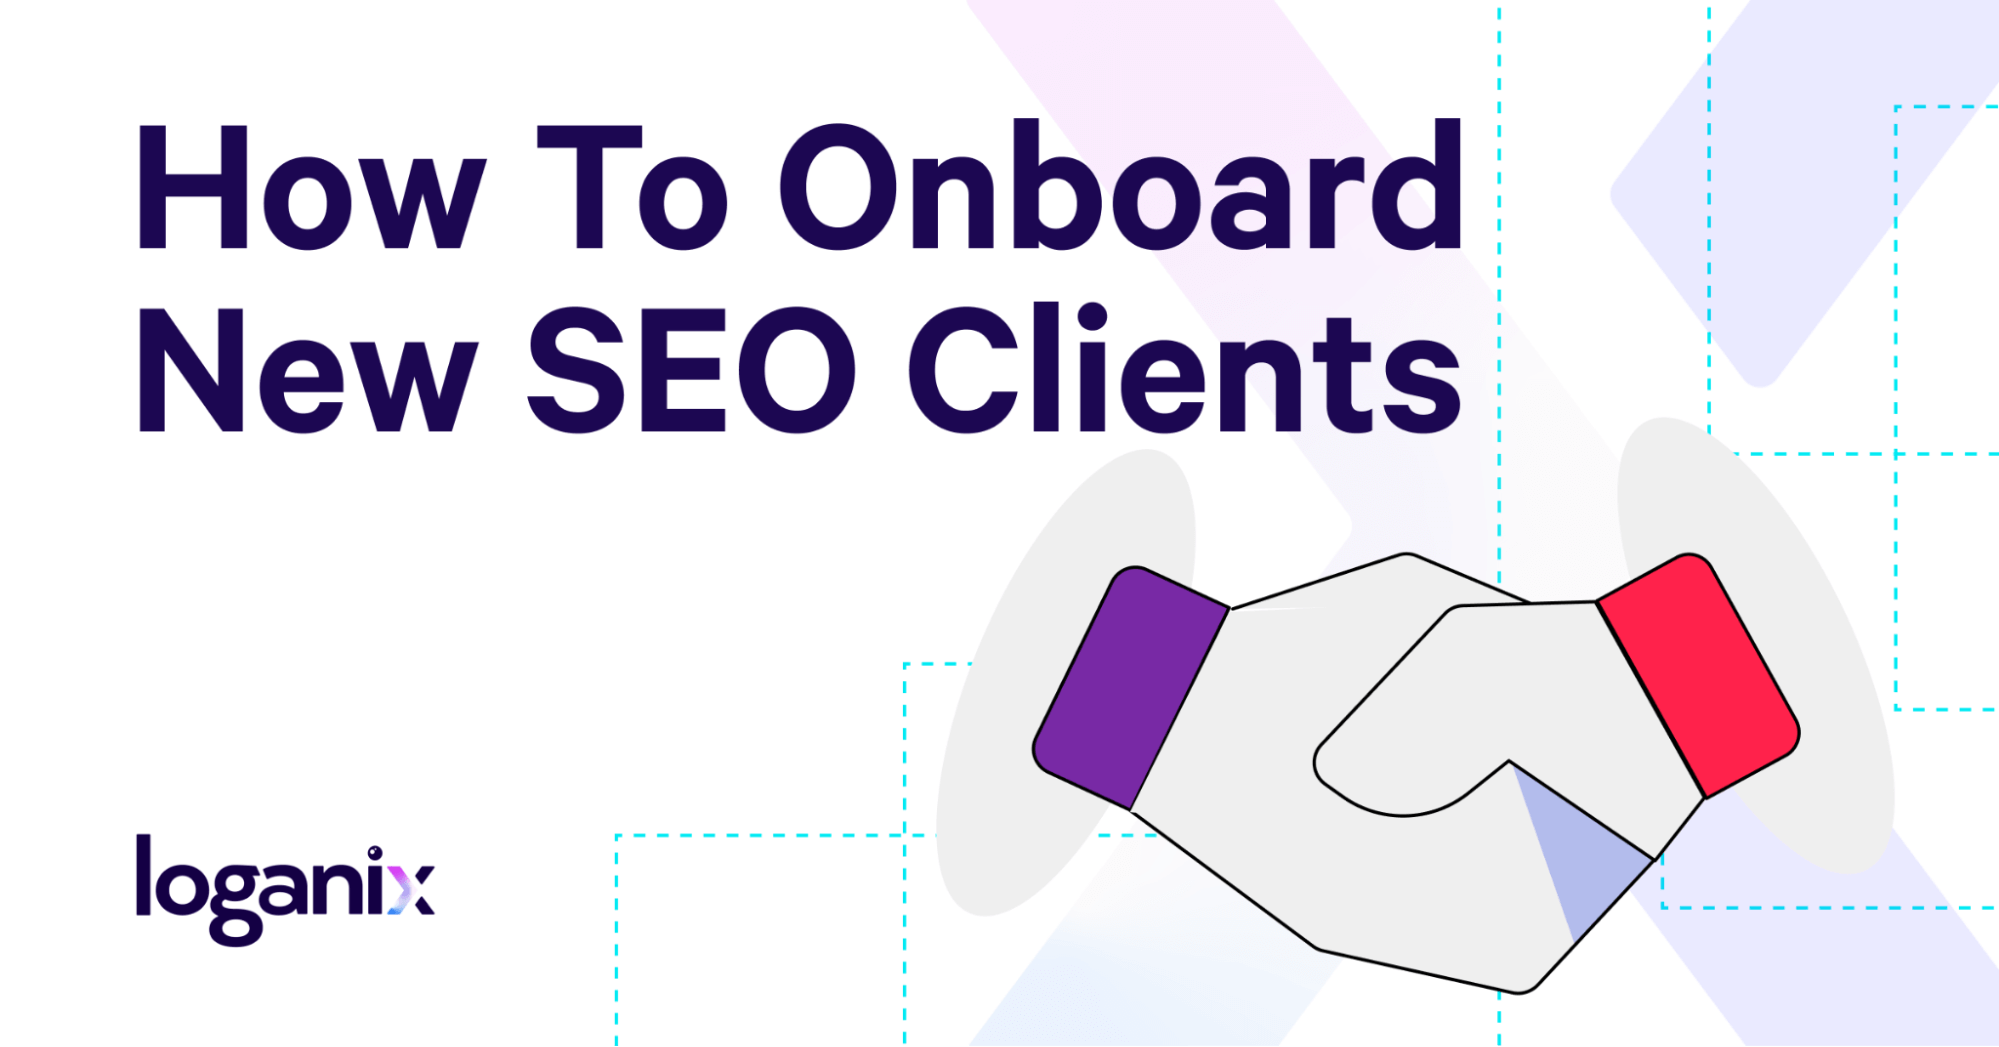 How To Onboard New SEO Clients